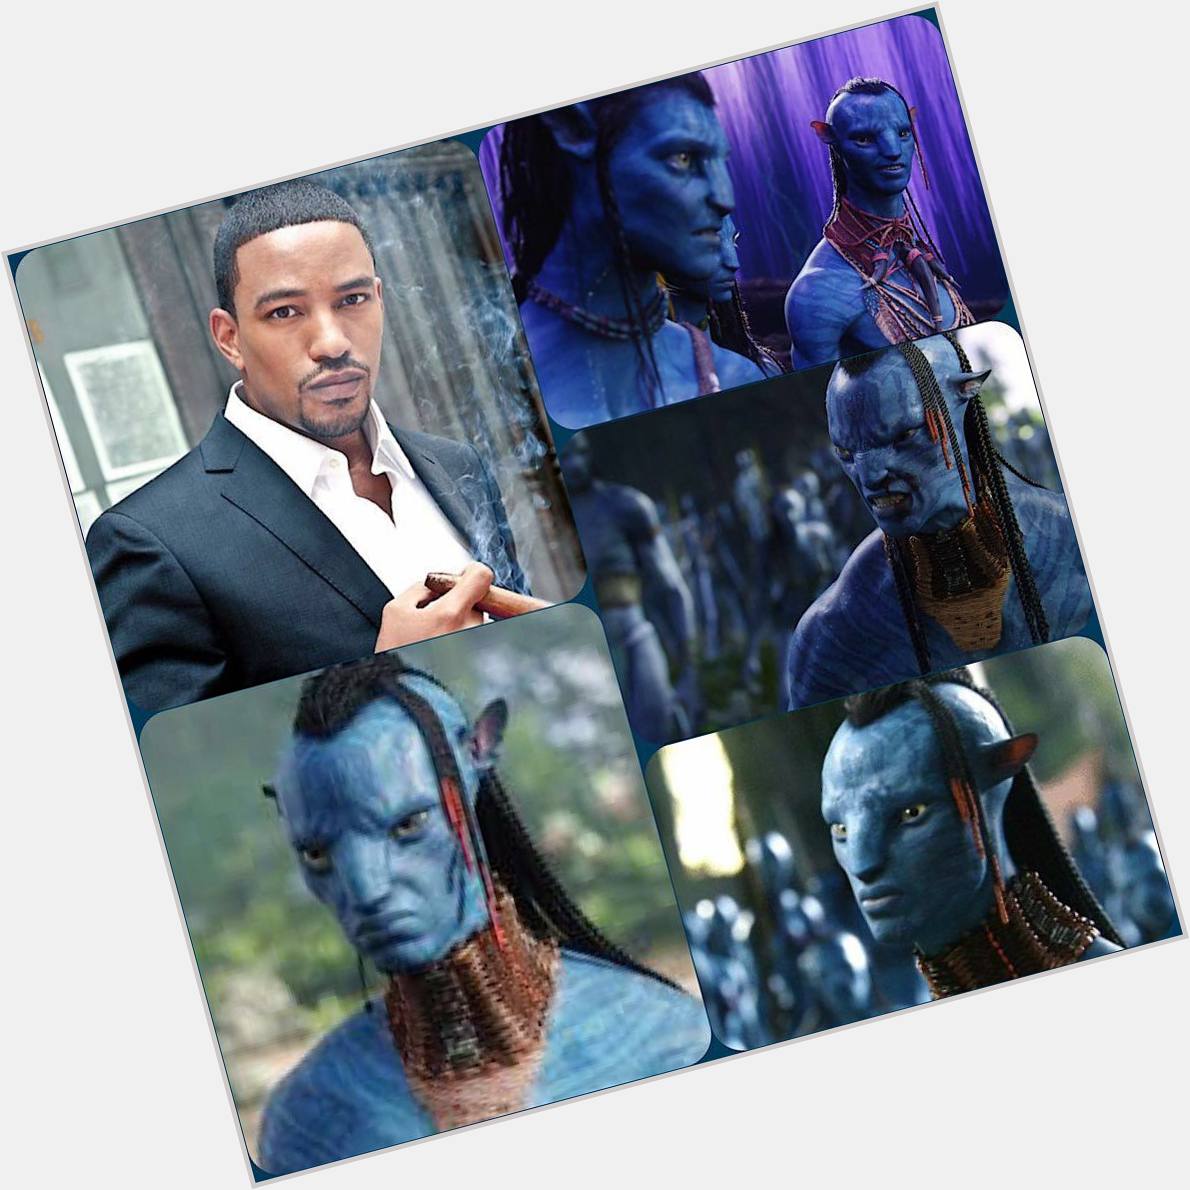 Happy Birthday Laz Alonso, who played Tsu-Tey in & much more! 